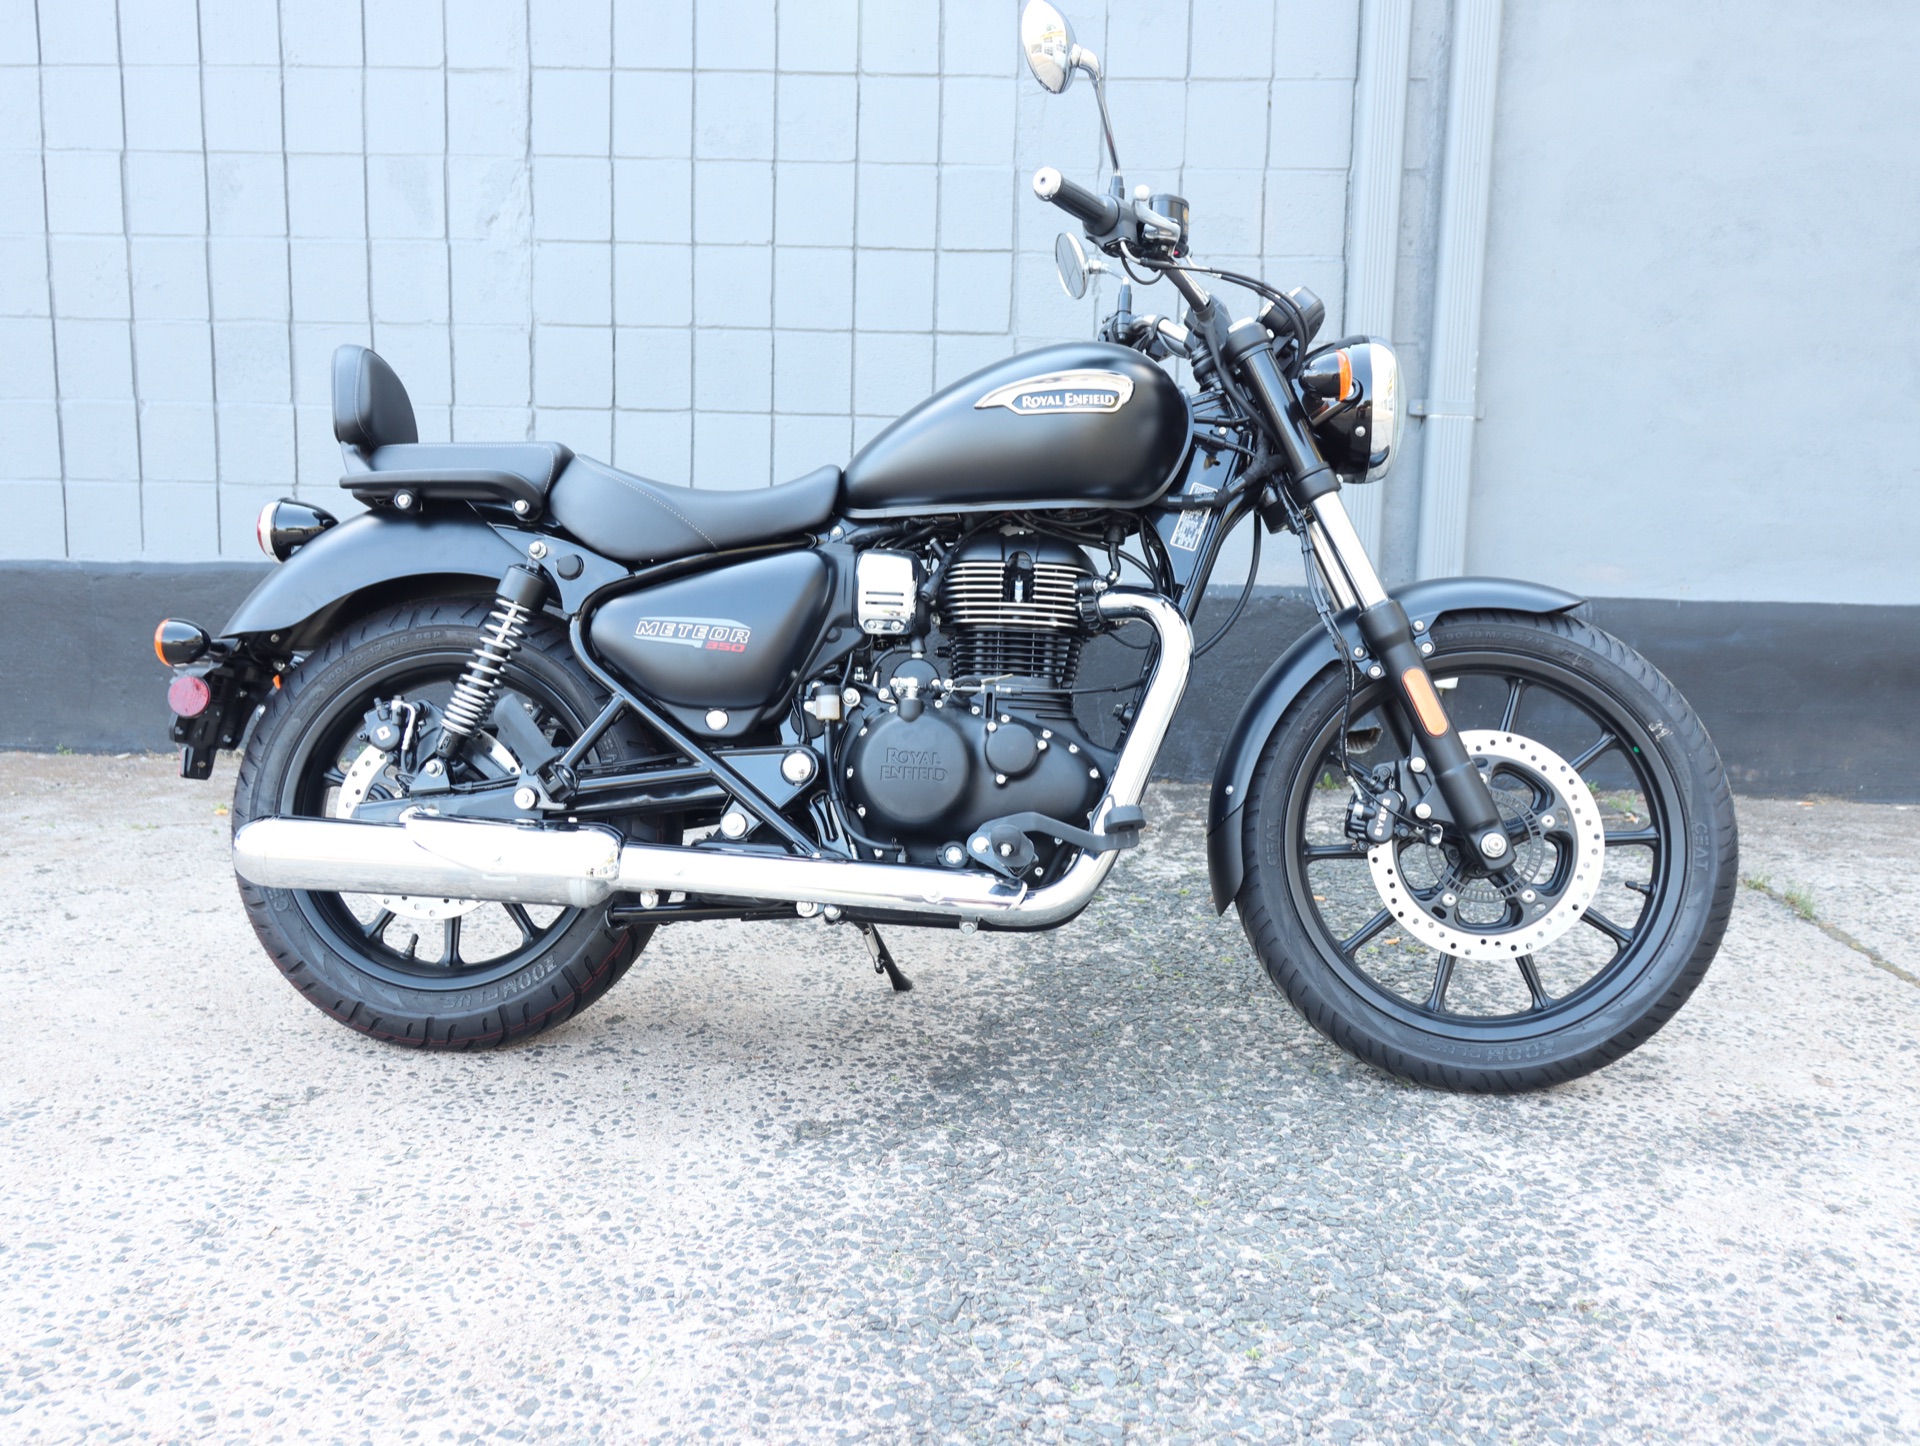 2022 Royal Enfield Meteor 350 in Enfield, Connecticut - Photo 2